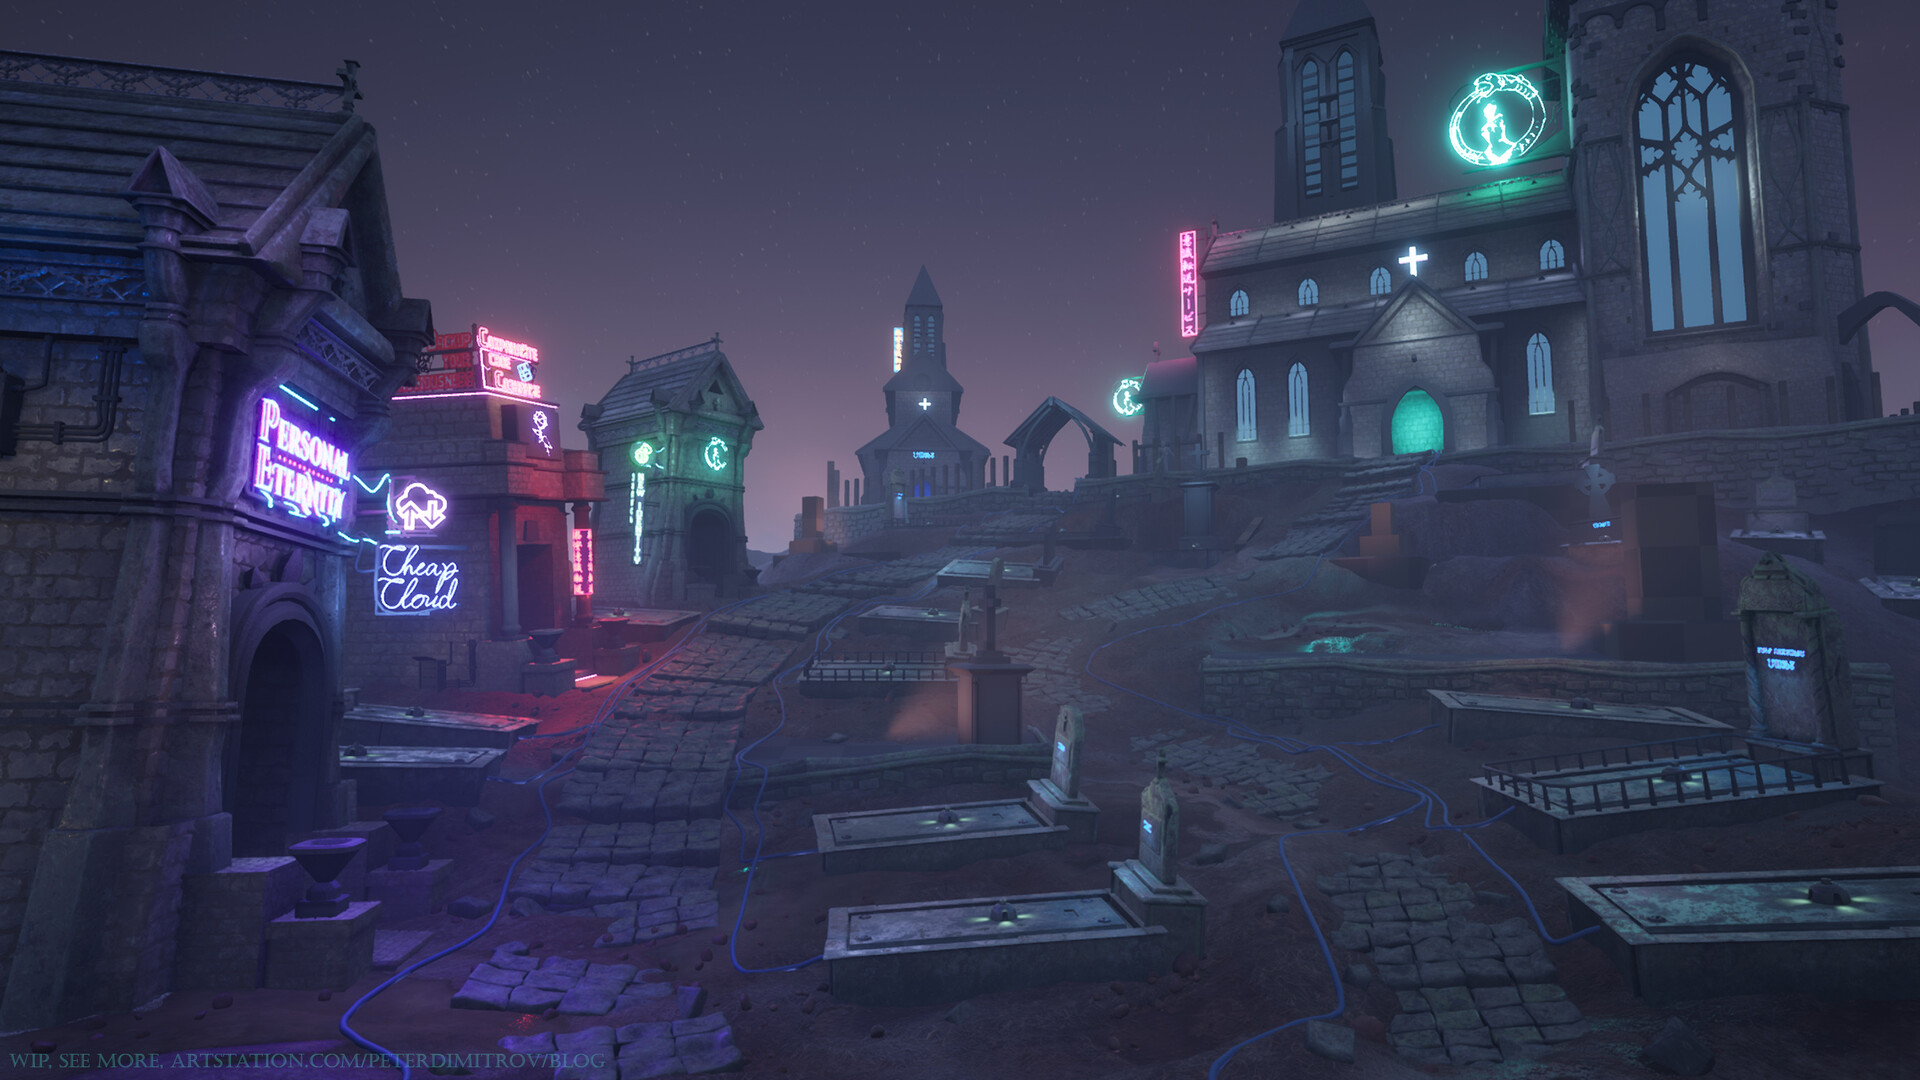 A look at the scene from the main camera angle. There are more neon signs on the mausoleums and the cathedral. They also now illuminate in electric colors the surroundings, as opposed to before when they were casting no lights.